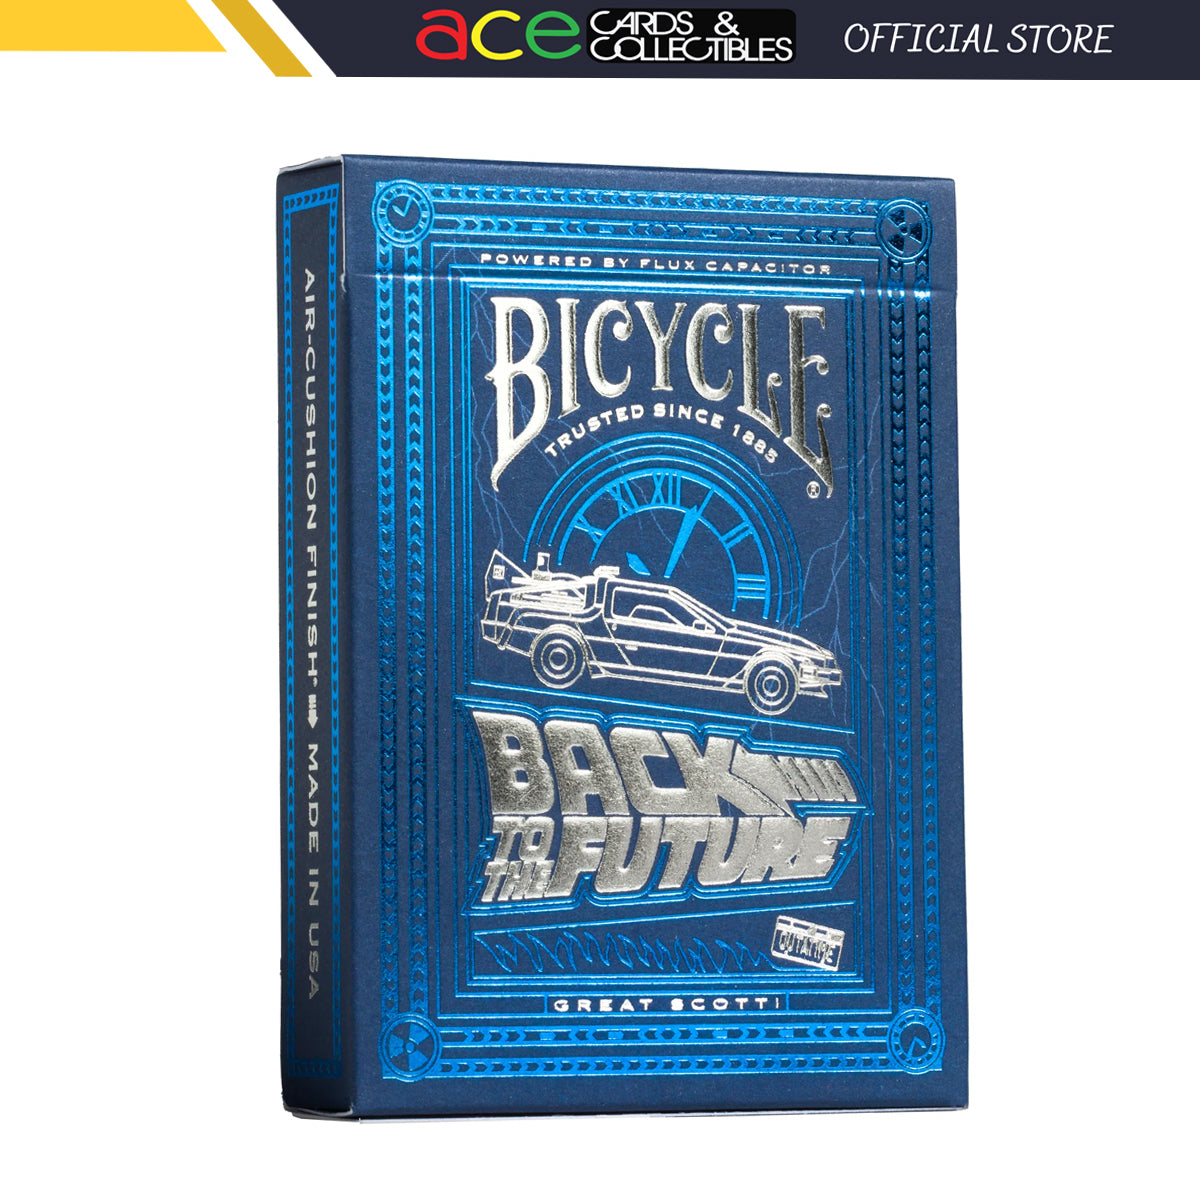 Bicycle Back to the Future Playing Cards-United States Playing Cards Company-Ace Cards & Collectibles